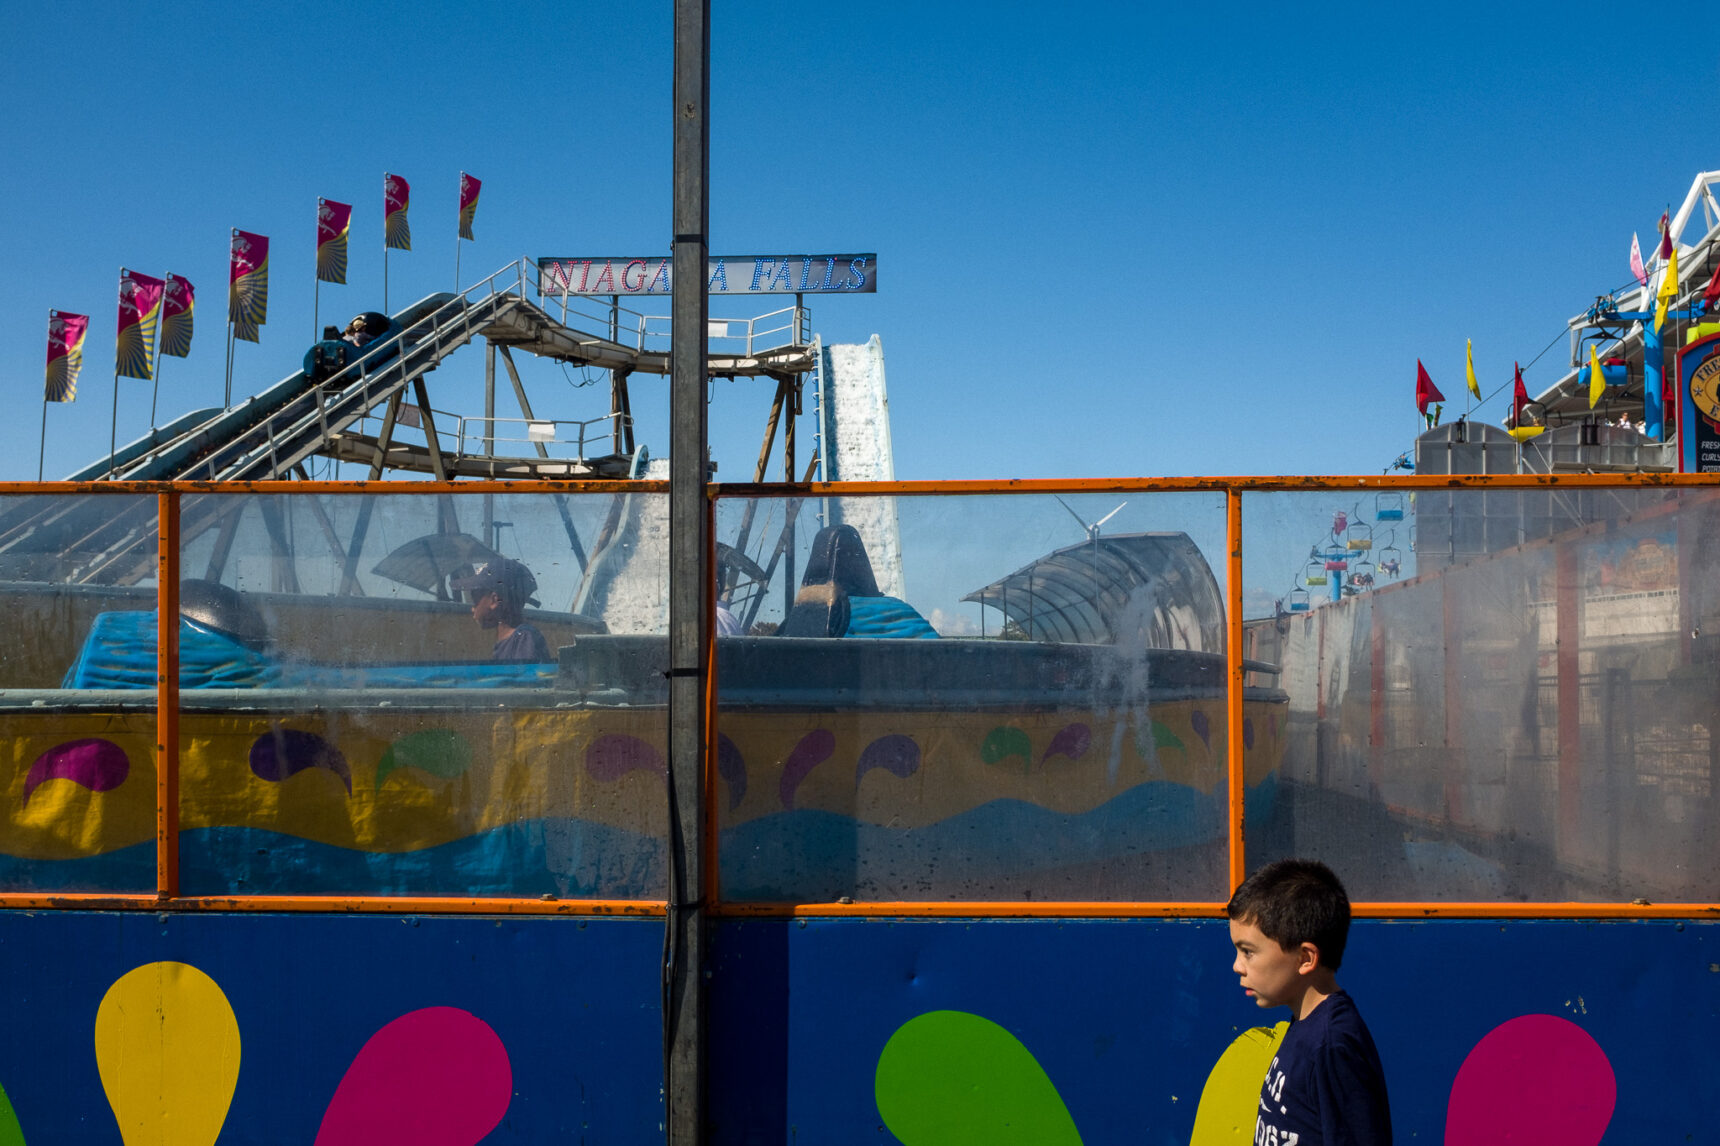 Street Photographer's Guide To The CNE - Wide Shots Show The Event